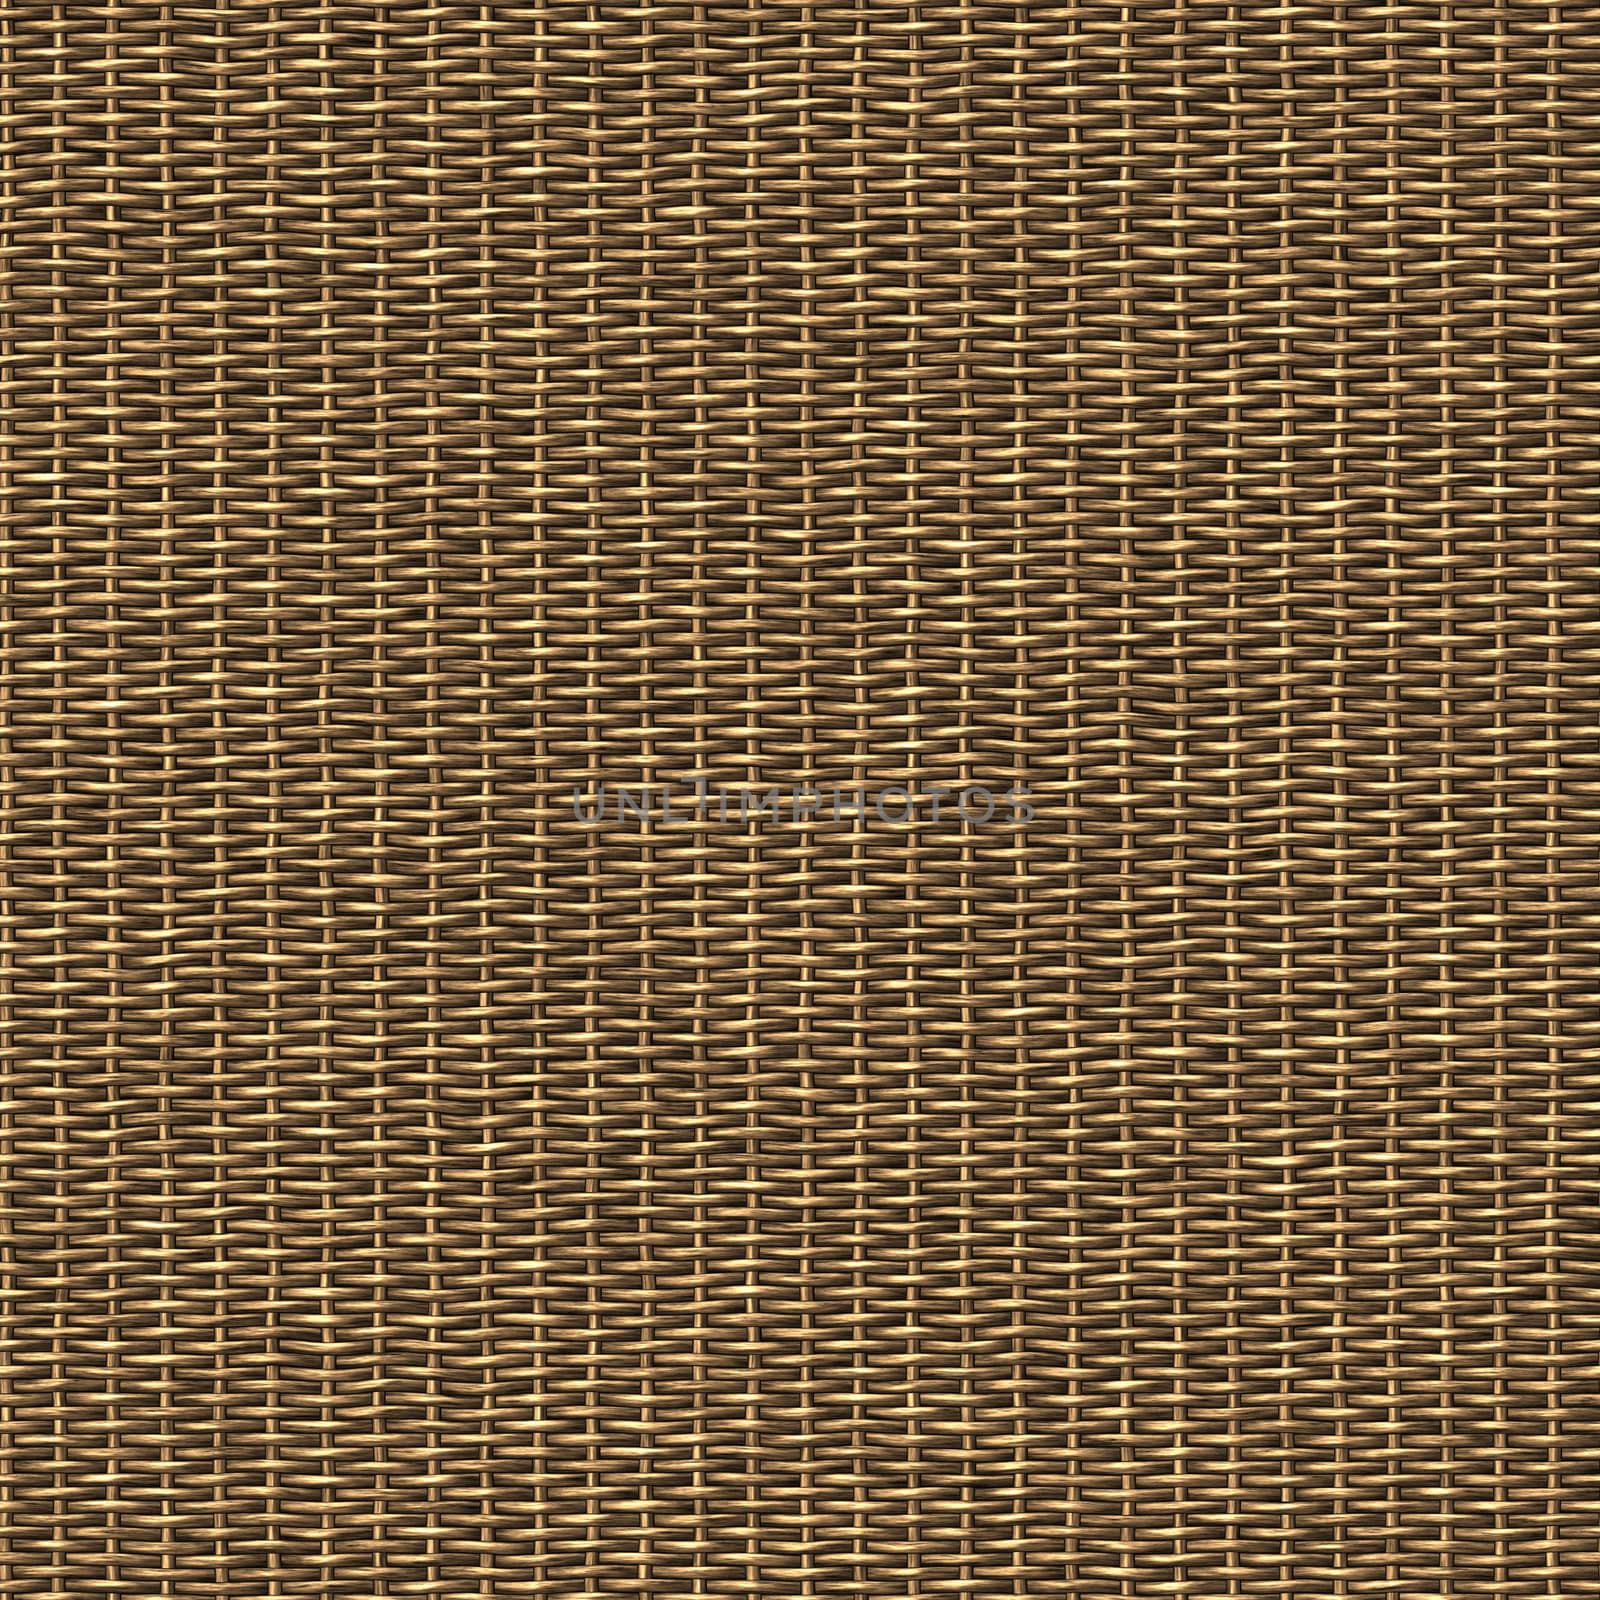 Seamless computer generated high quality woven basket twill texture background